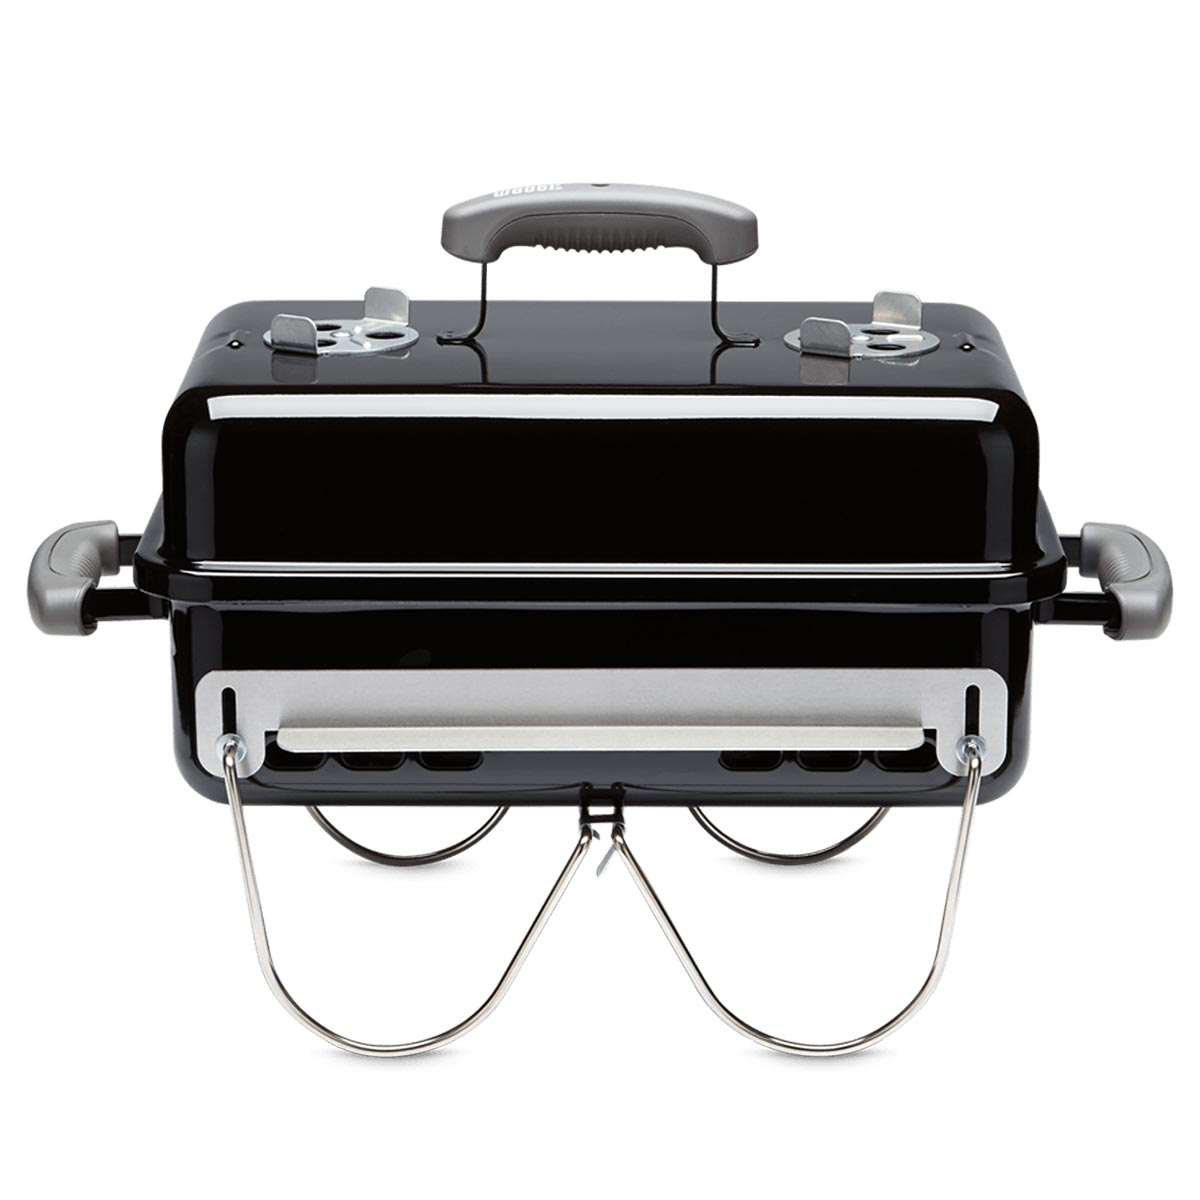 Weber Go Anywhere Portable Charcoal Grill (Black) 121020